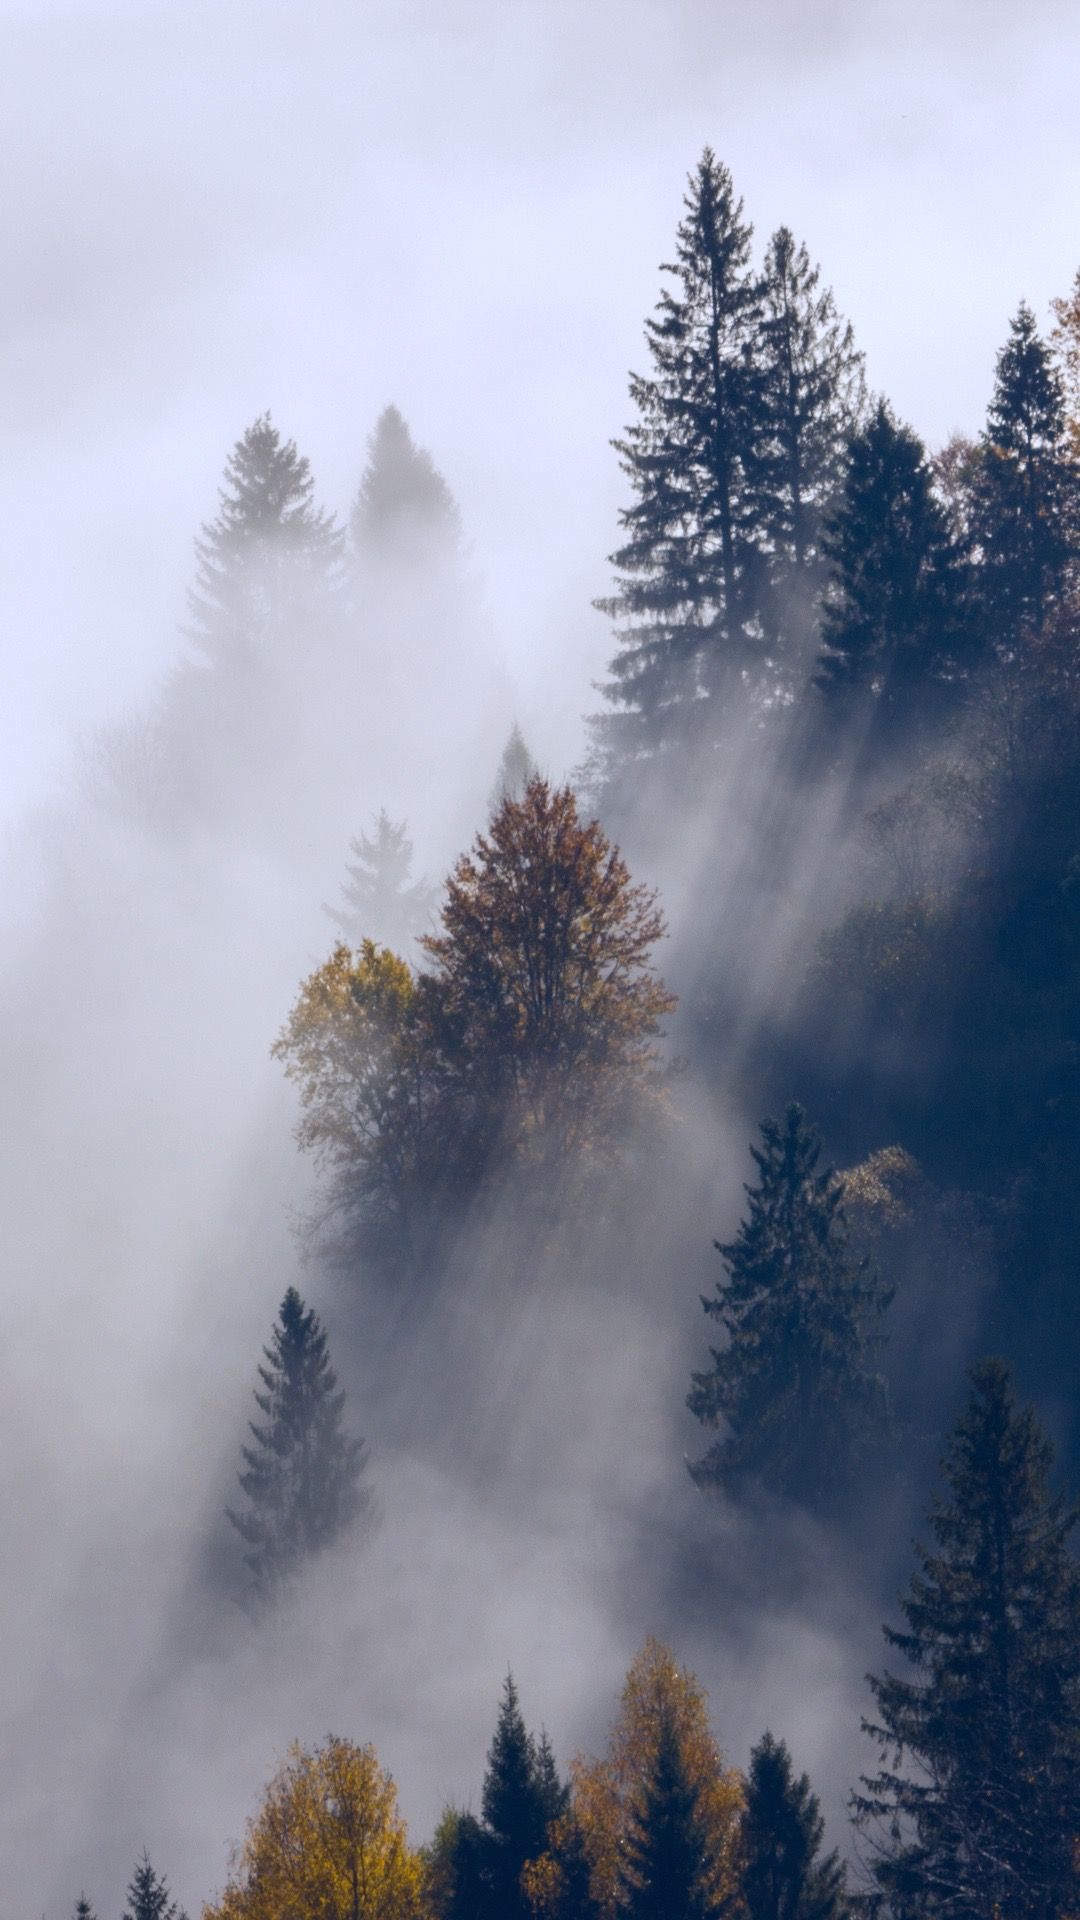 Foggy forest wallpaper. Forest wallpaper, Nature photography, Foggy forest